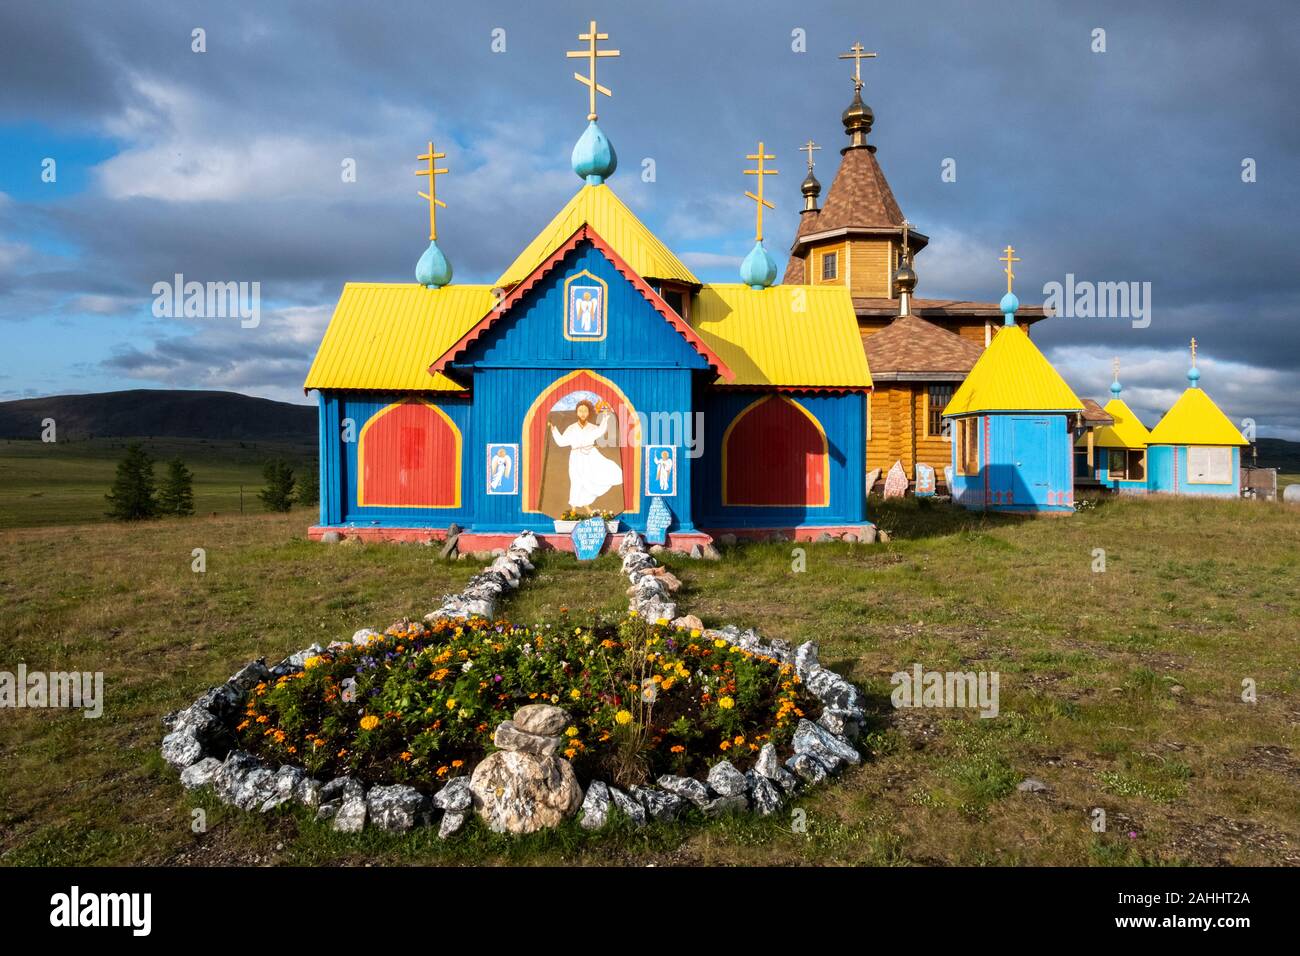 Saint Michael the Archangel church in the Land of Hope Nenet camp, Siberia, Russia Stock Photo